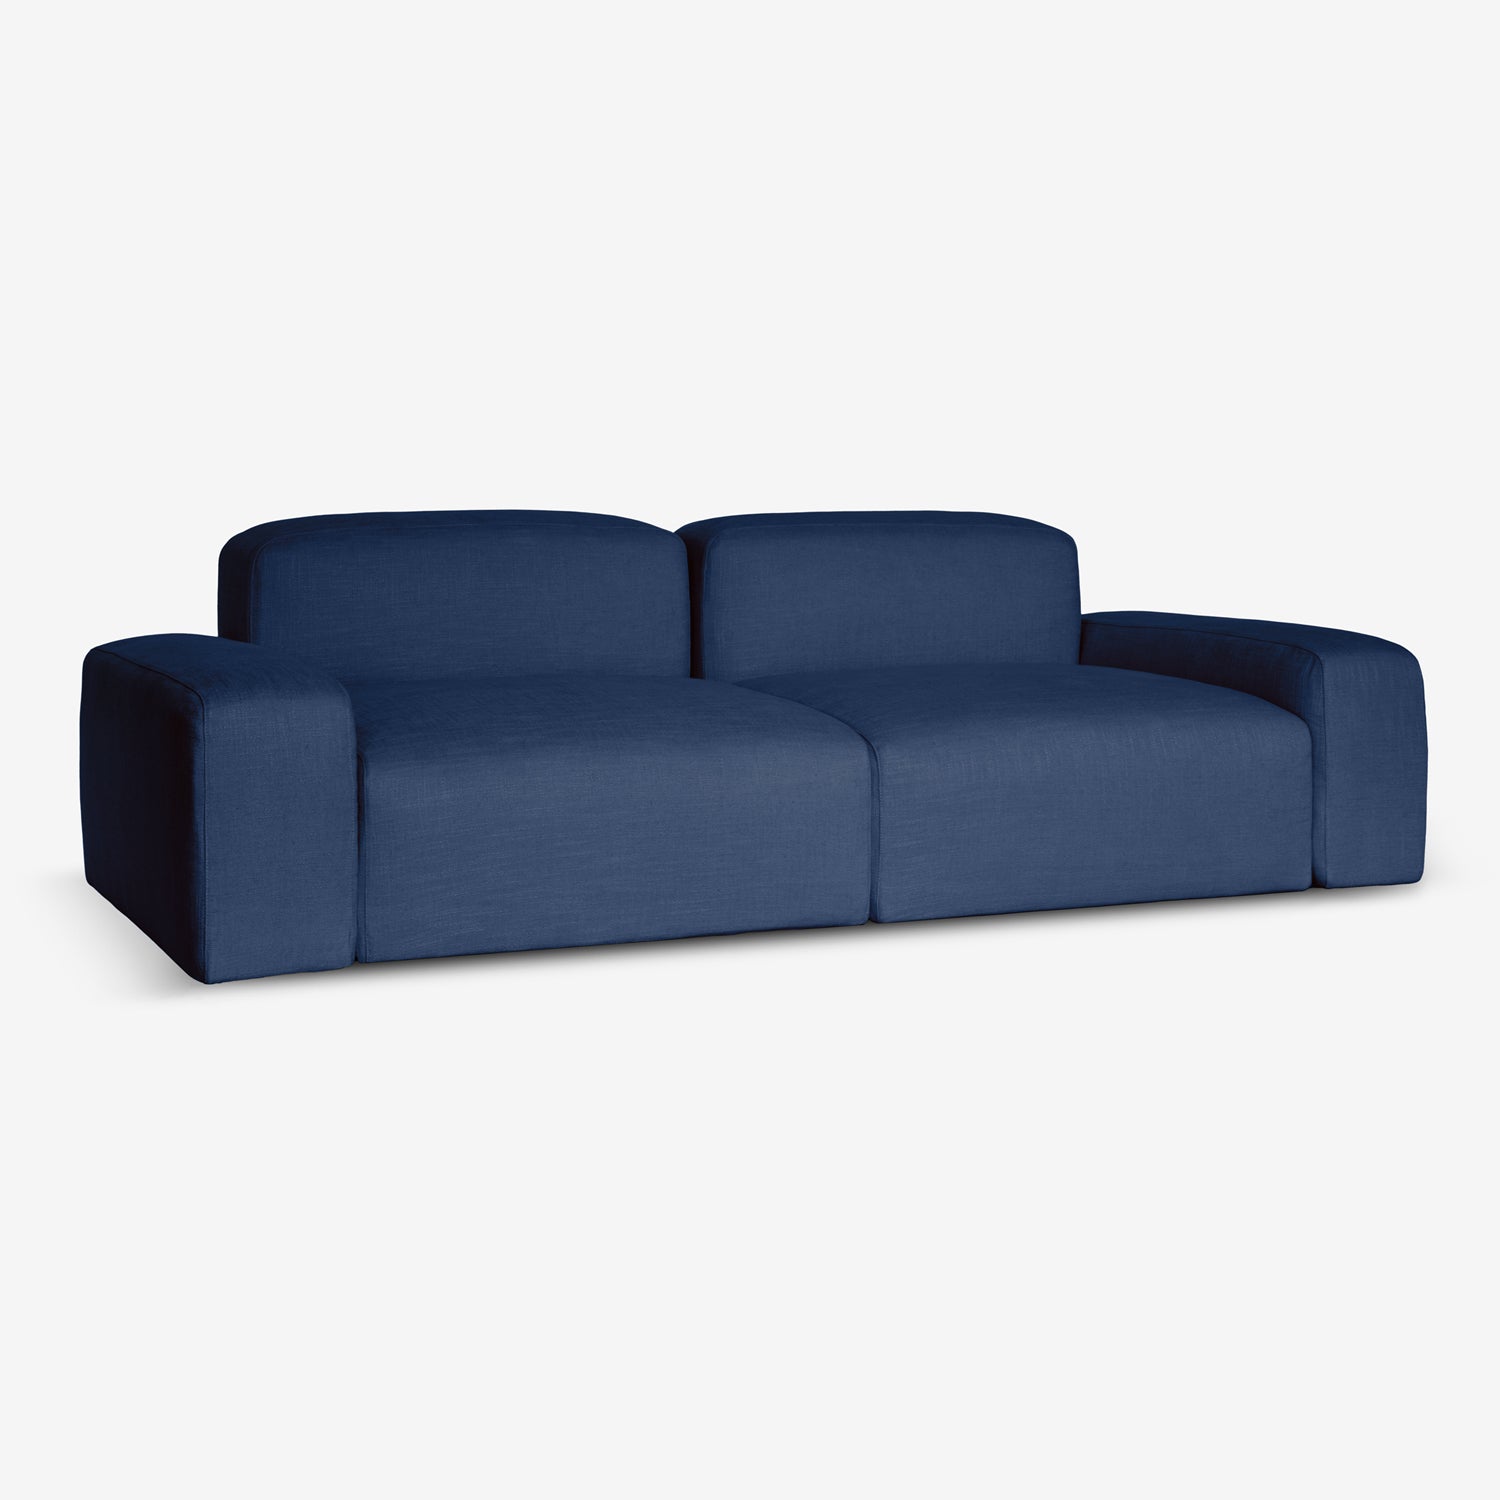 Minimalist Navy Blue Sofa for Sustainable Living